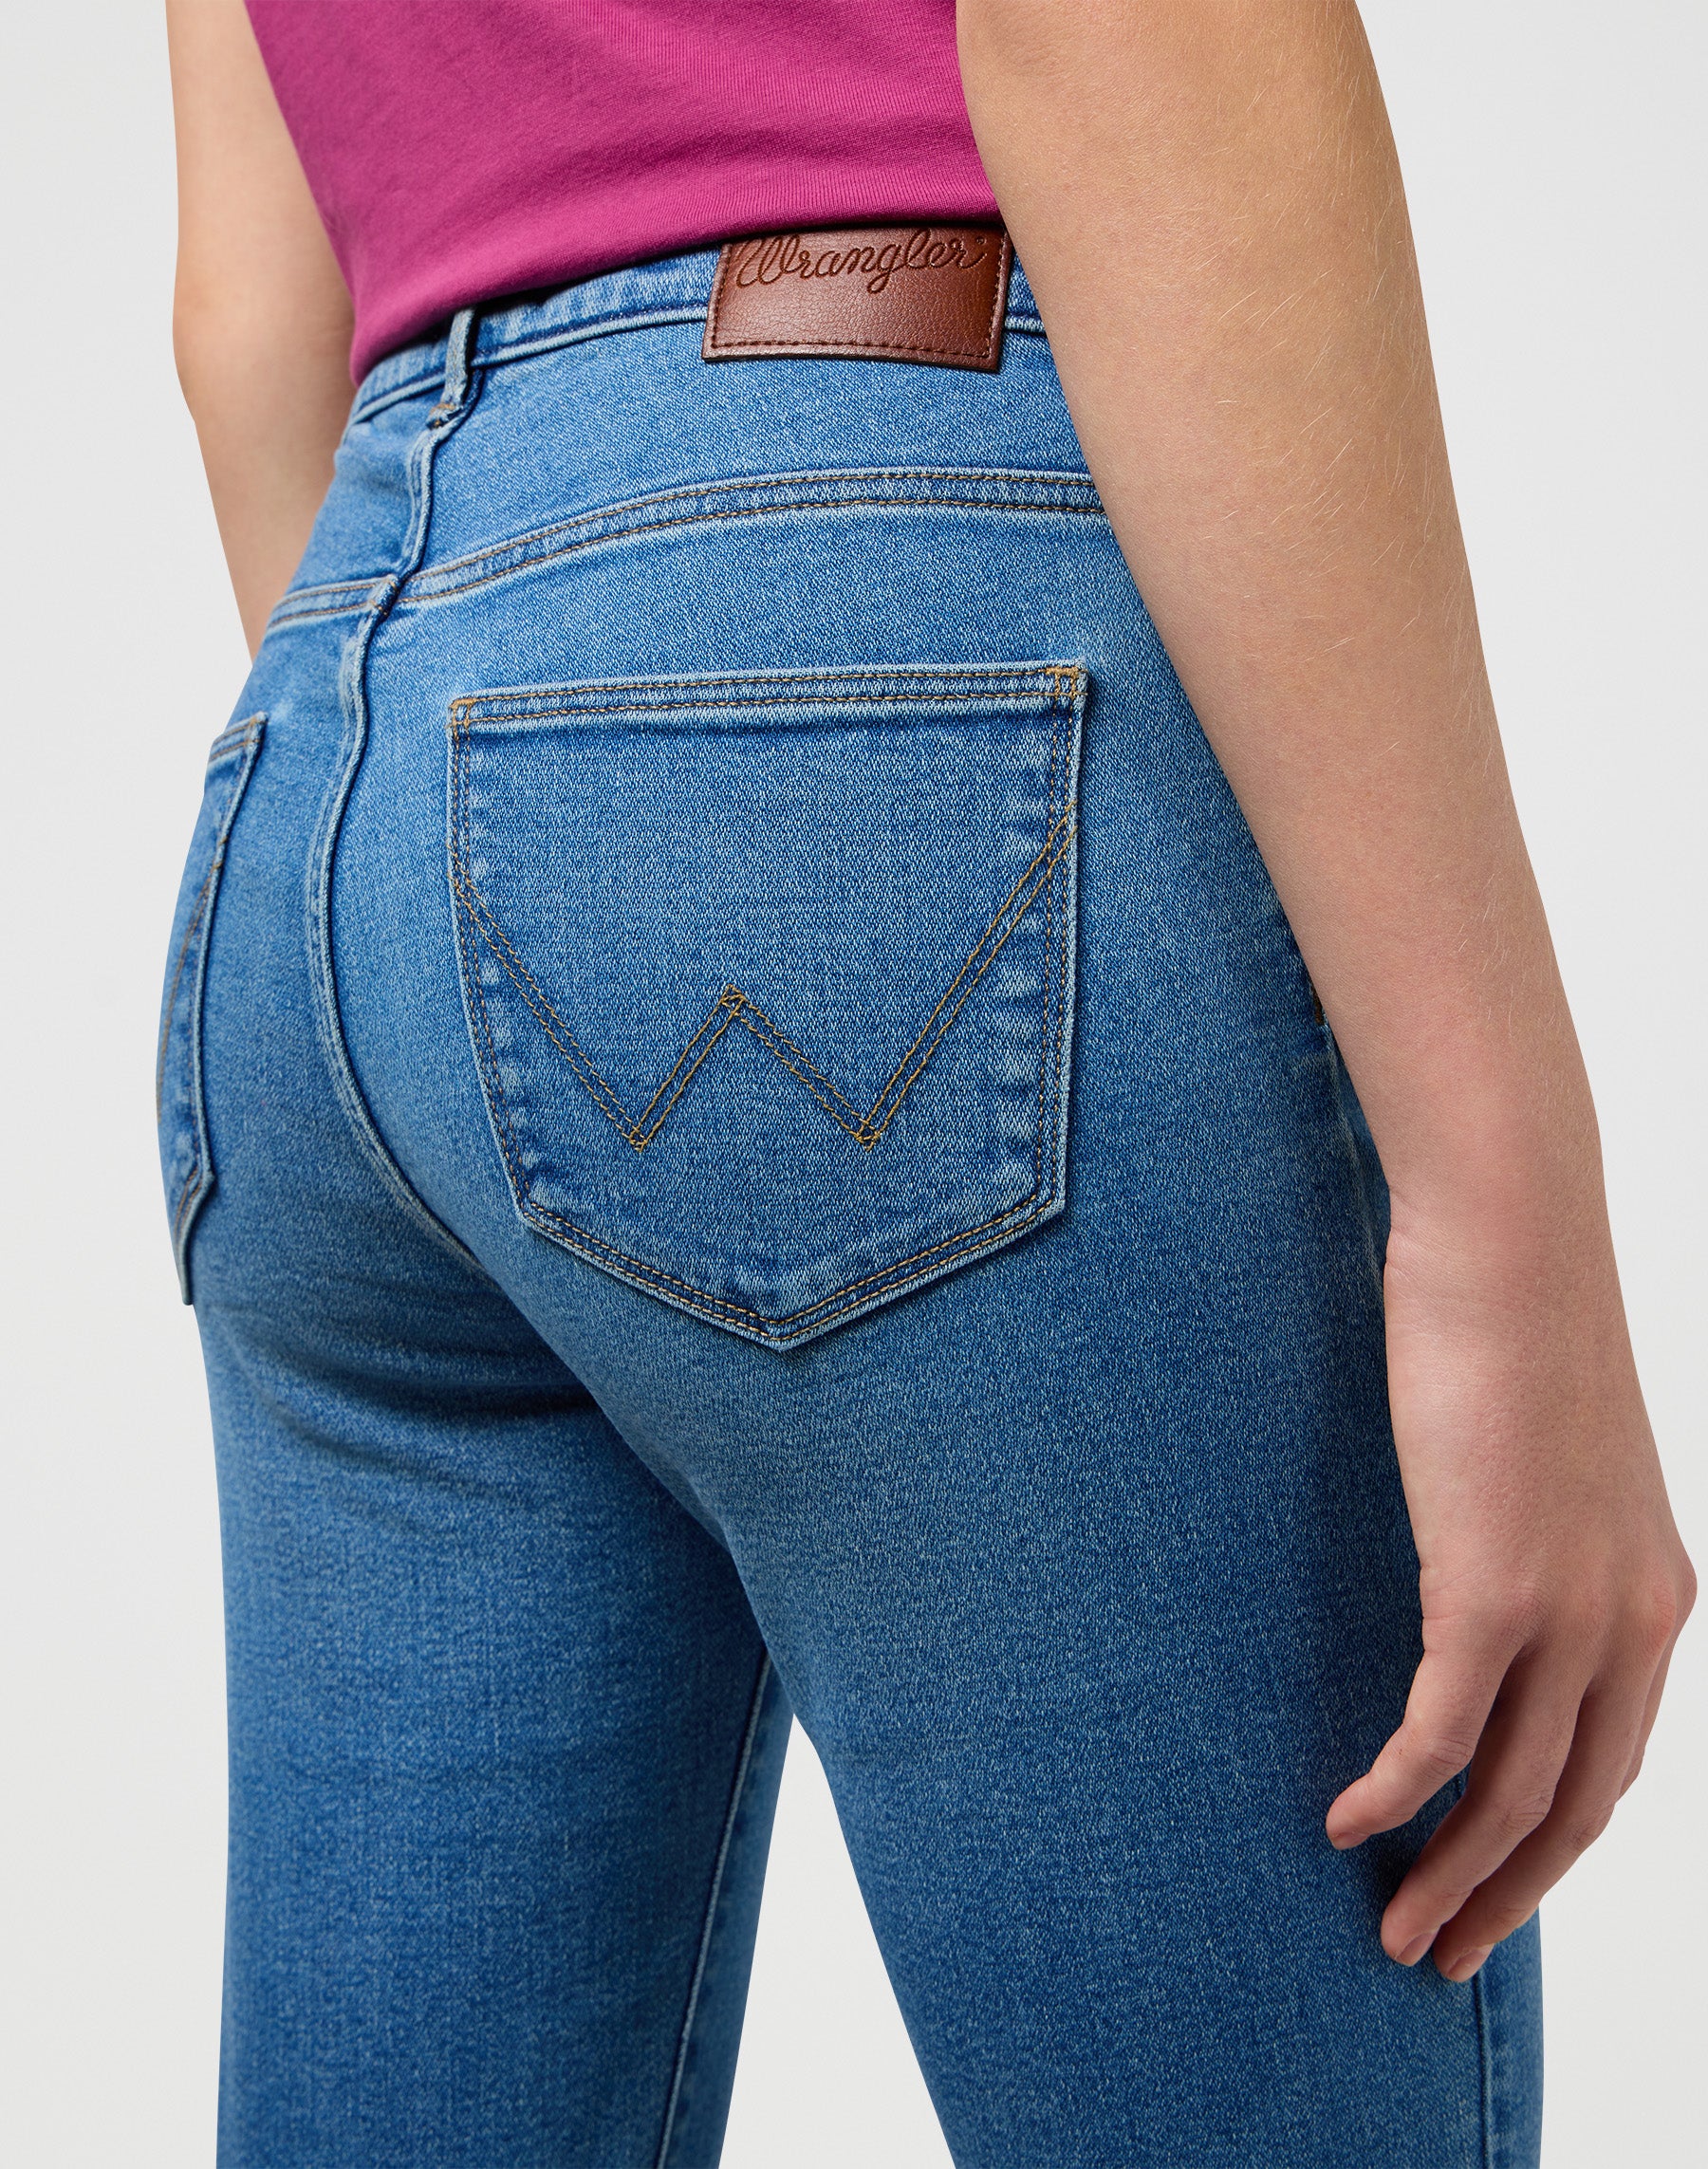 Bootcut in Peaceful Jeans Wrangler   